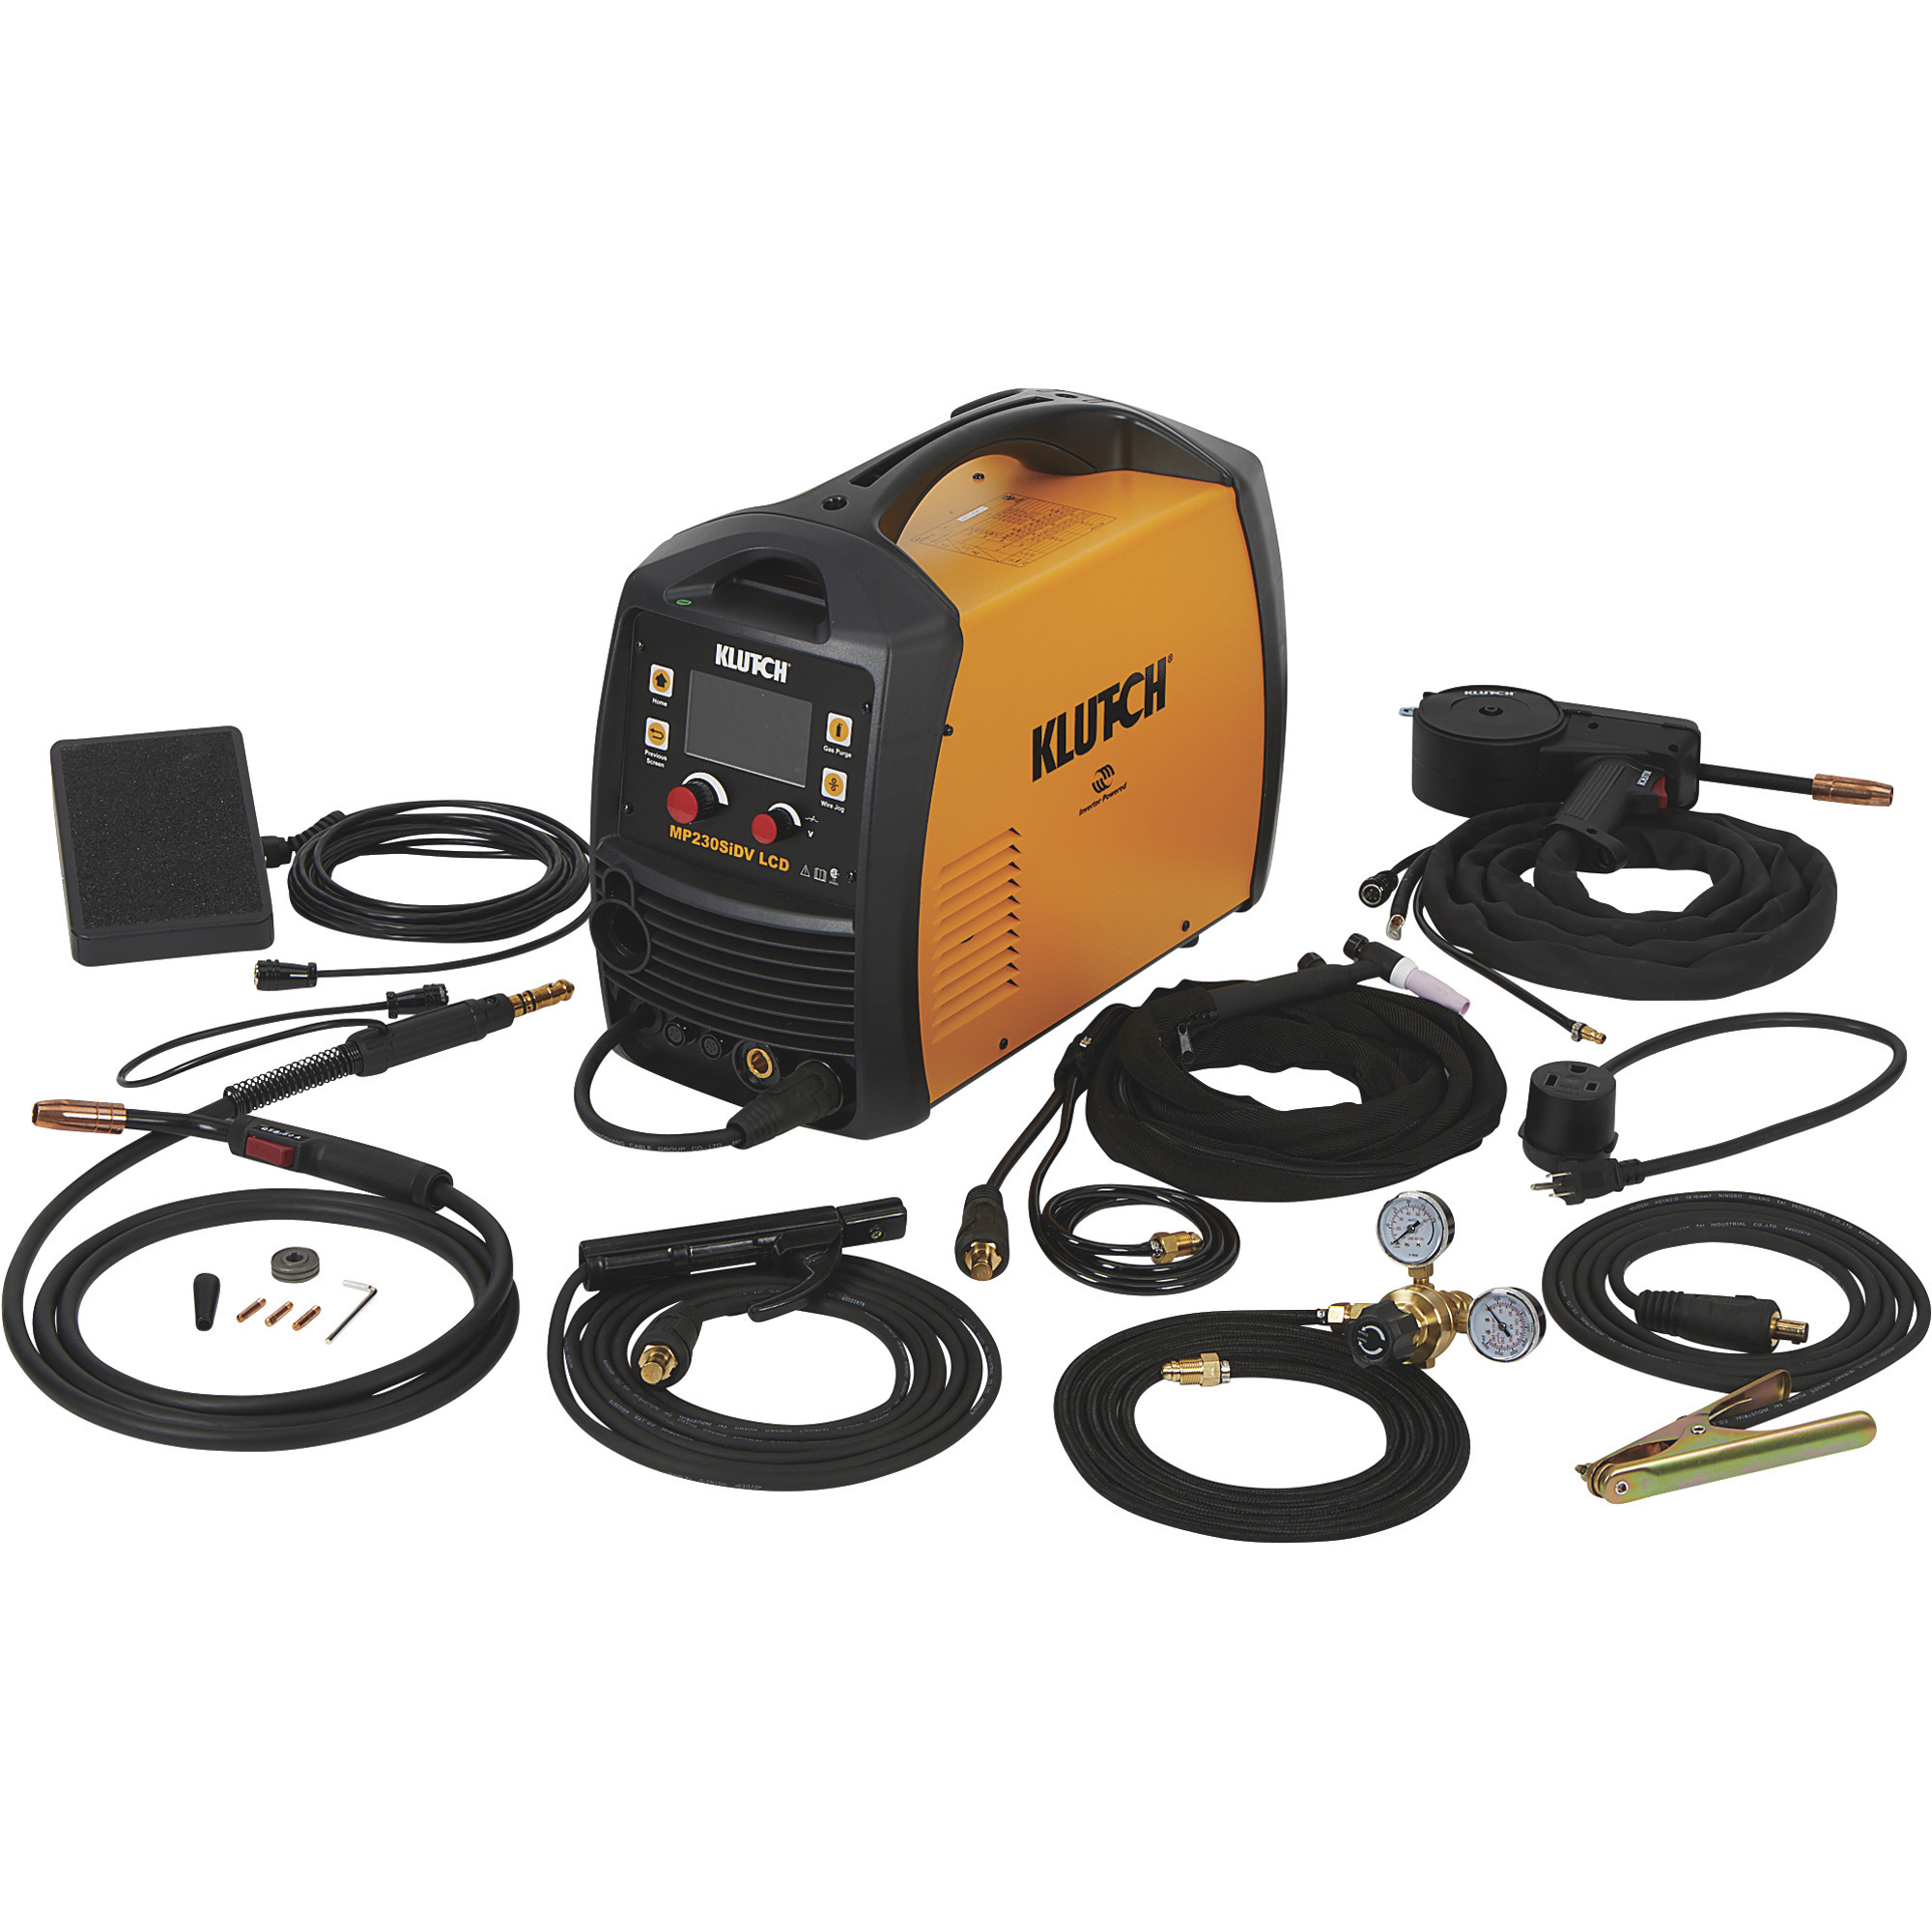 Klutch MP230SiDV LCD Flux-Core/MIG Welder with Multi-Processes, Spool Gun, LCD Display and Dual-Voltage Plug â Inverter, MIG, Flux-Core, Arc and TIG